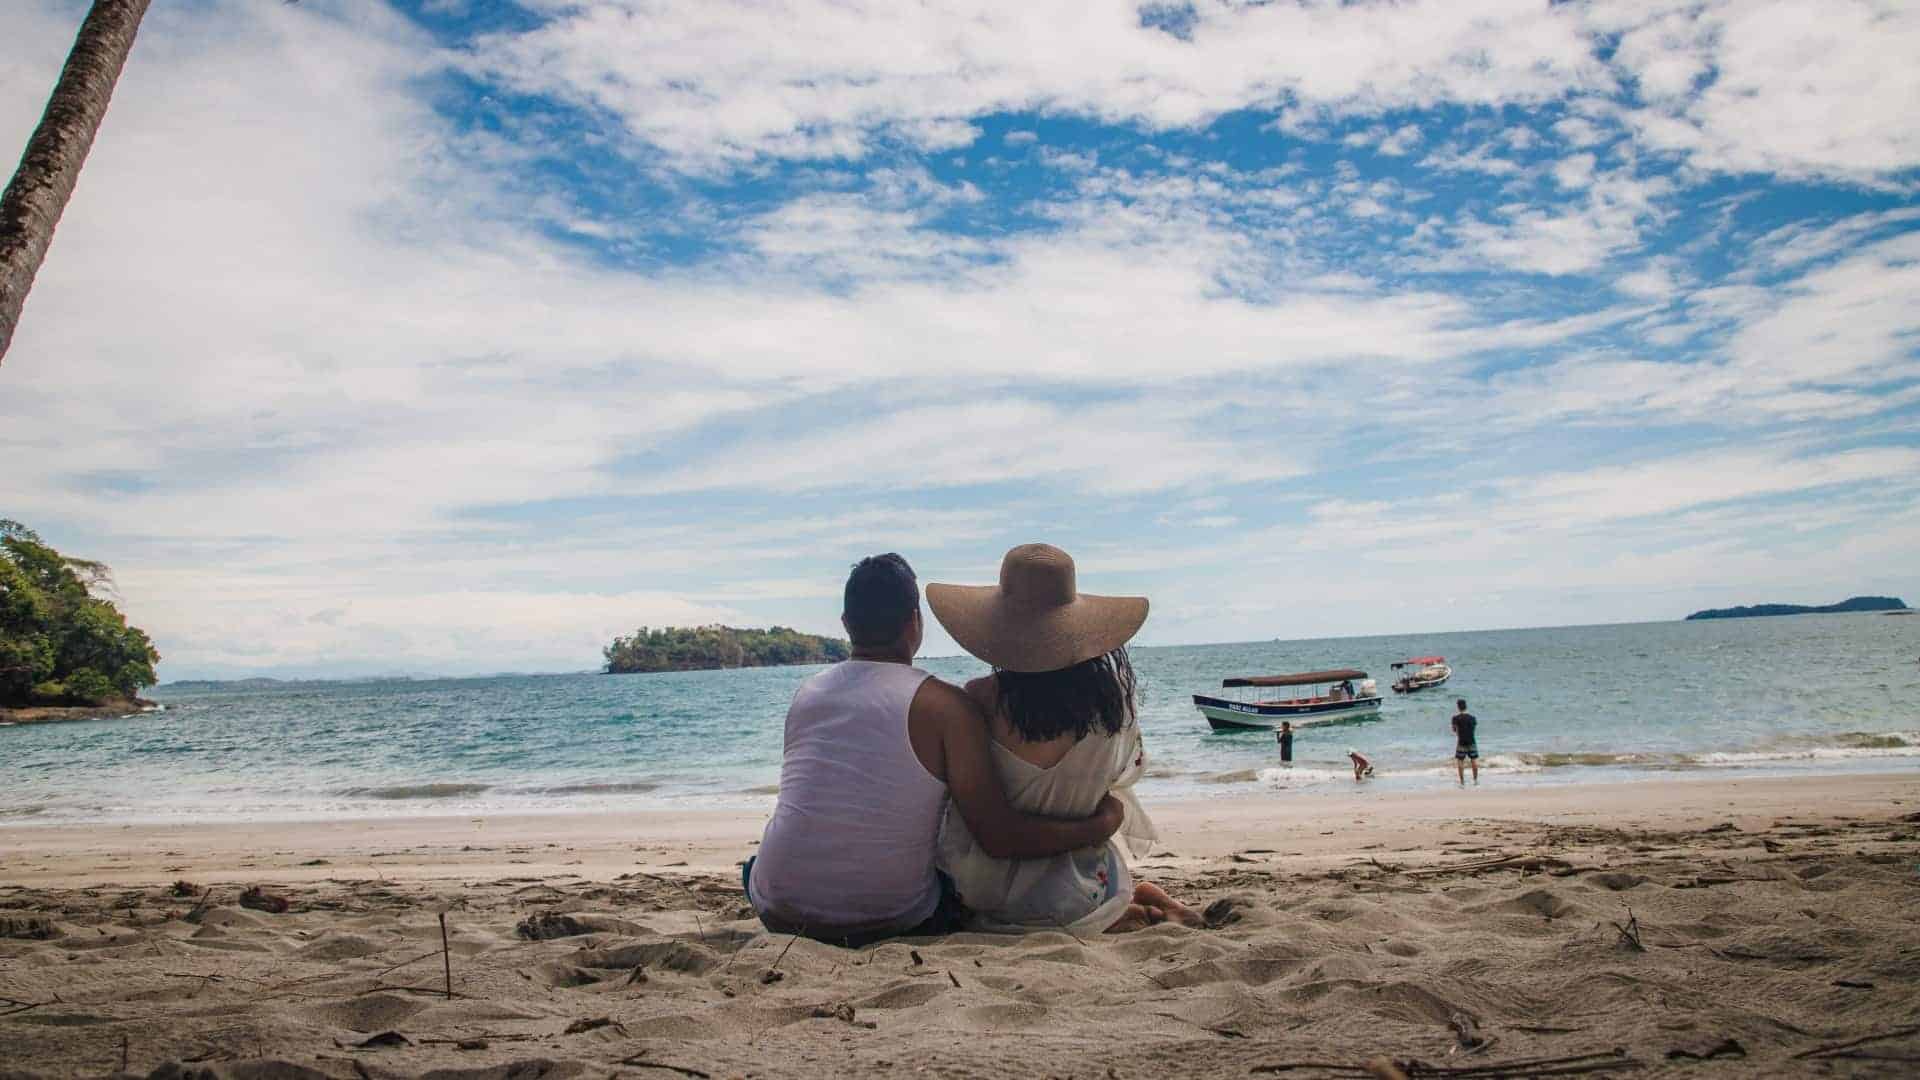 A couple sitting on the beach, gazing at the ocean waves with boats in the water.